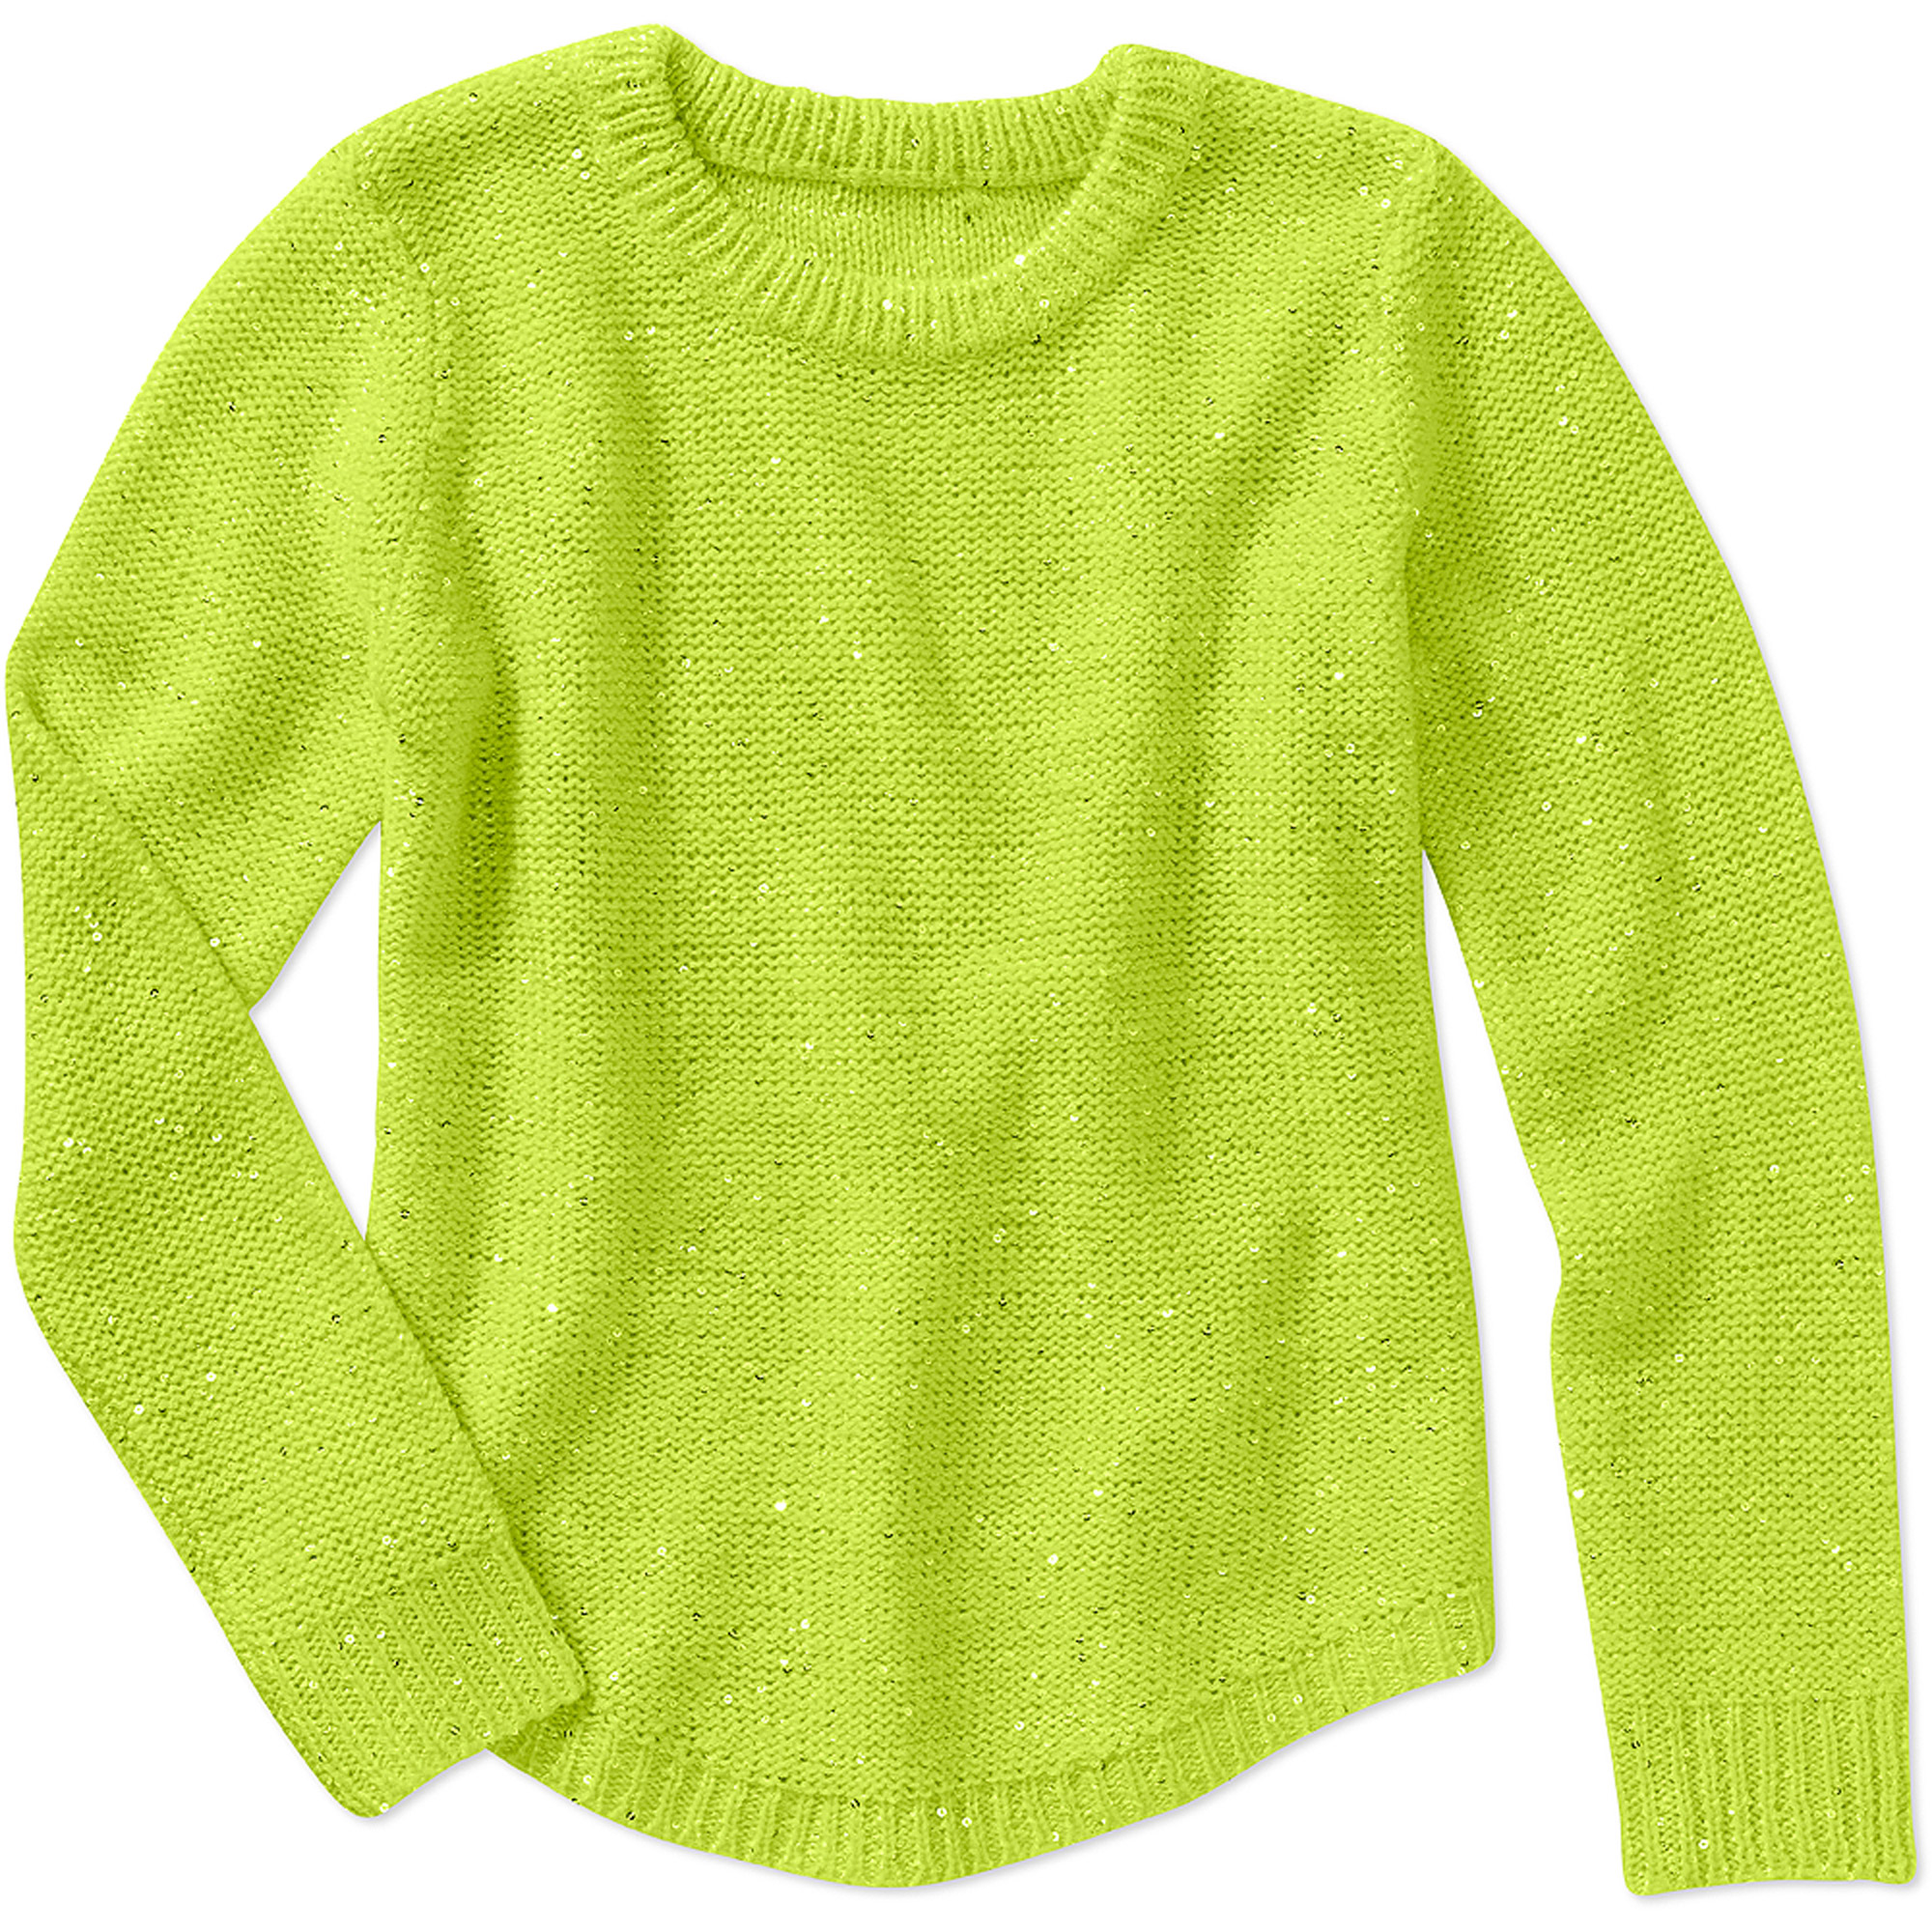 Girls' Sparkle Sweater - image 1 of 1